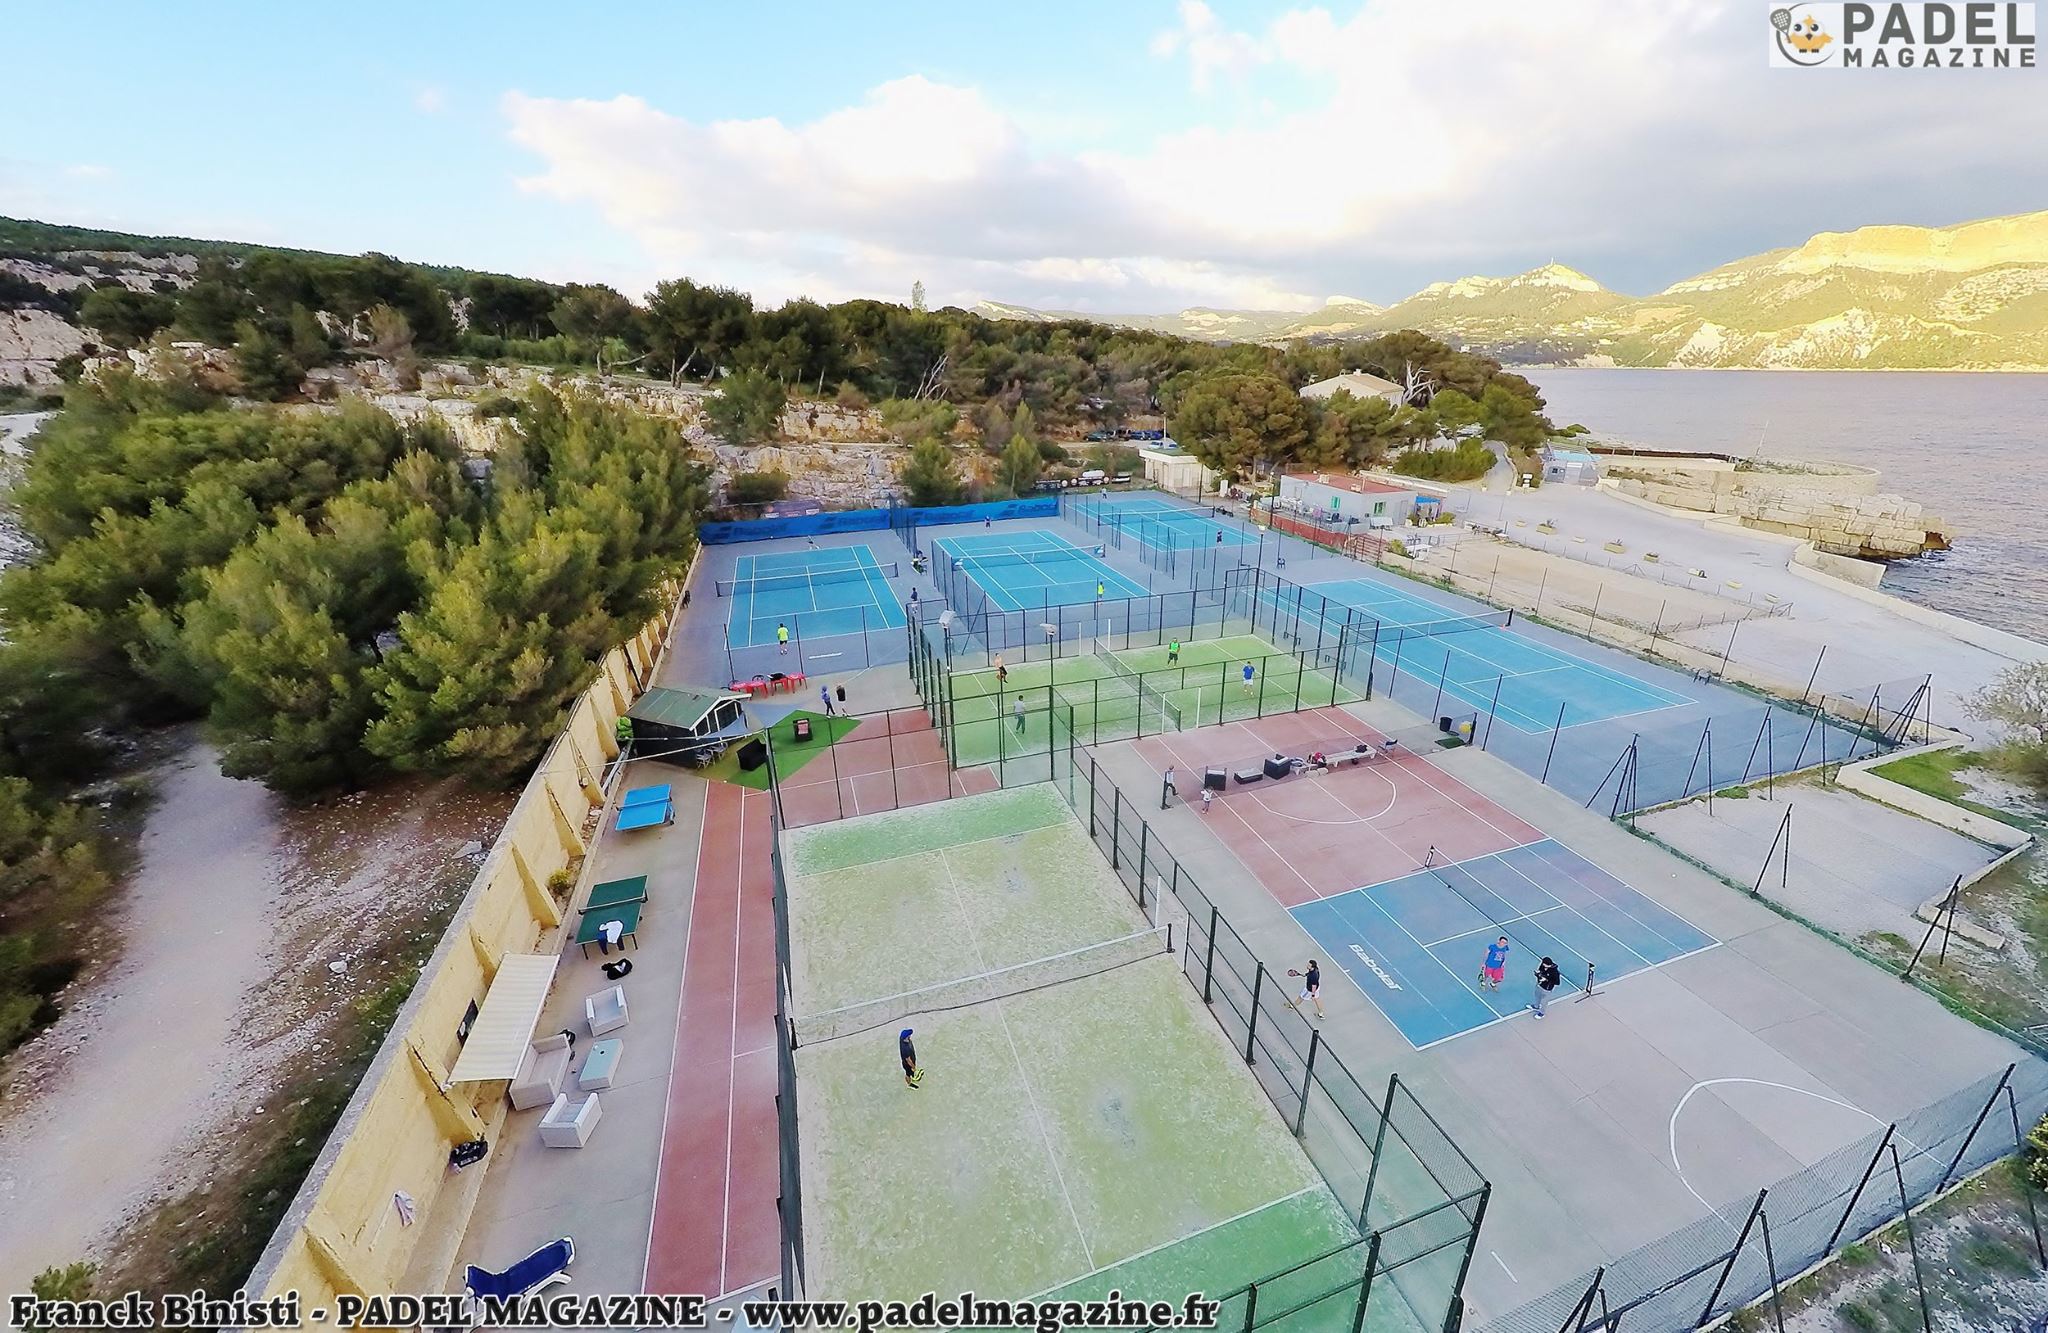 Padel Cassis club, the most beautiful French club?